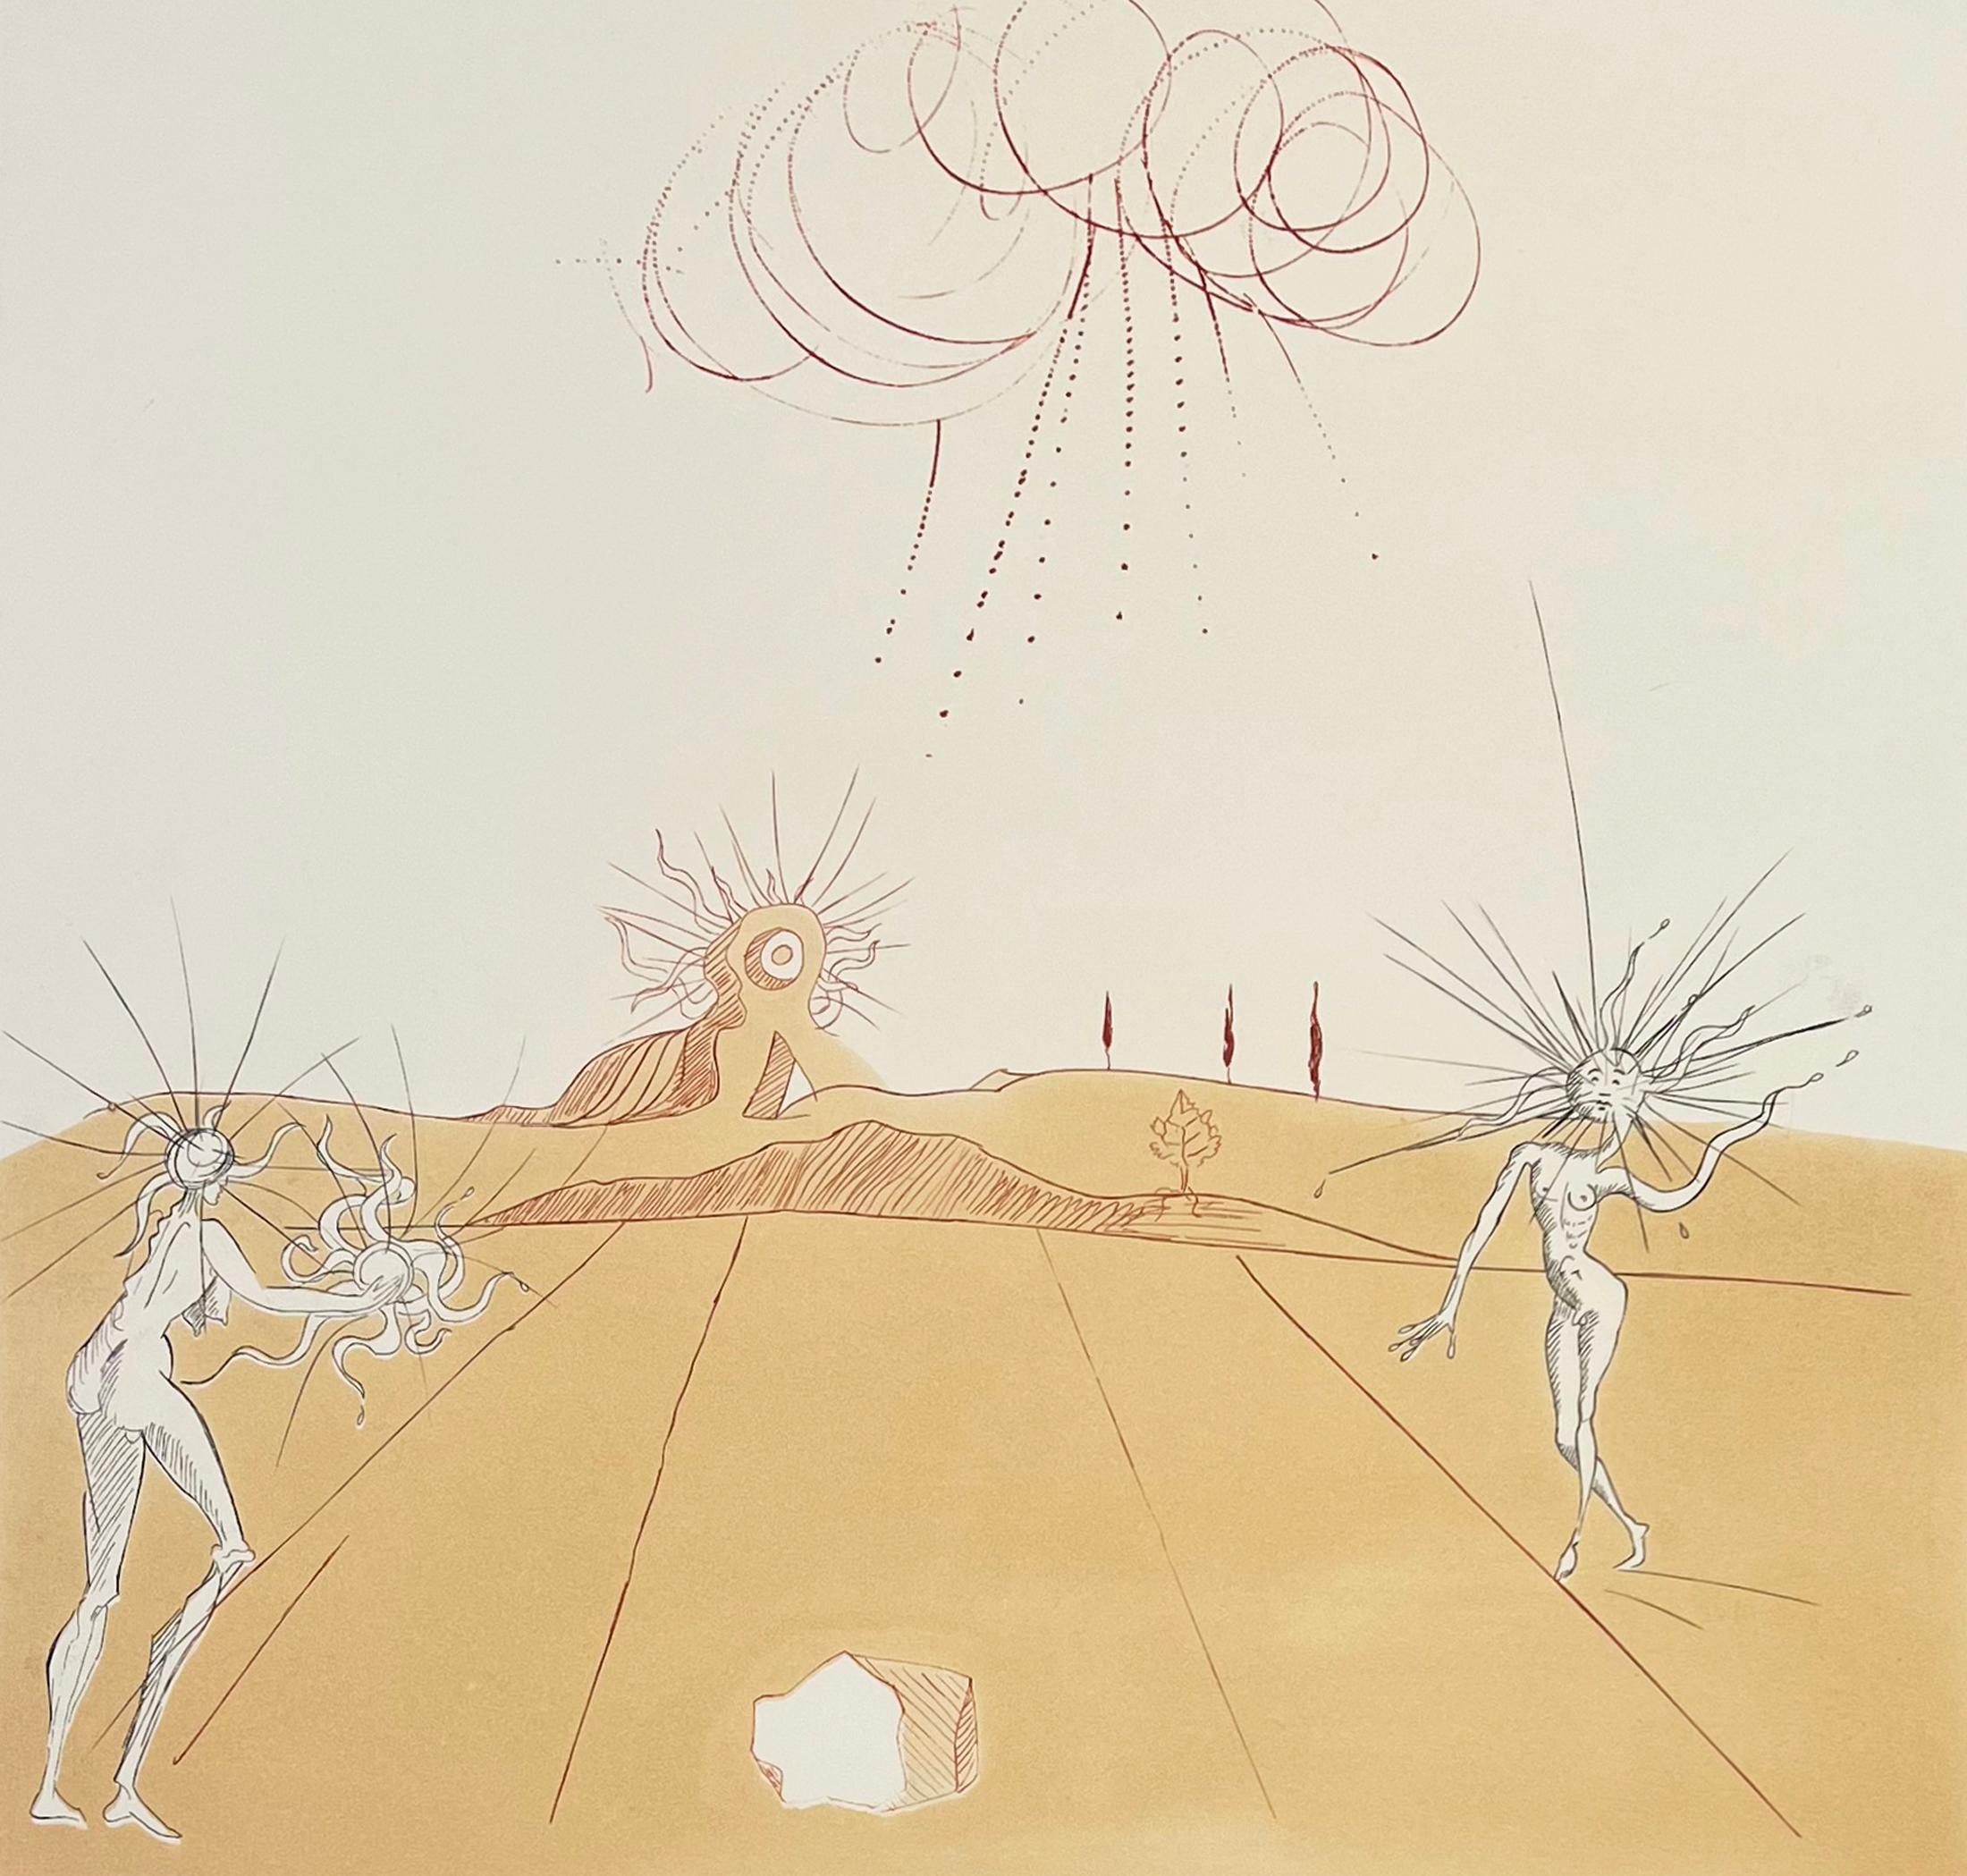 Salvador Dalí Abstract Print - Paysage avec figures-soleil from sun, from Neuf Paysages